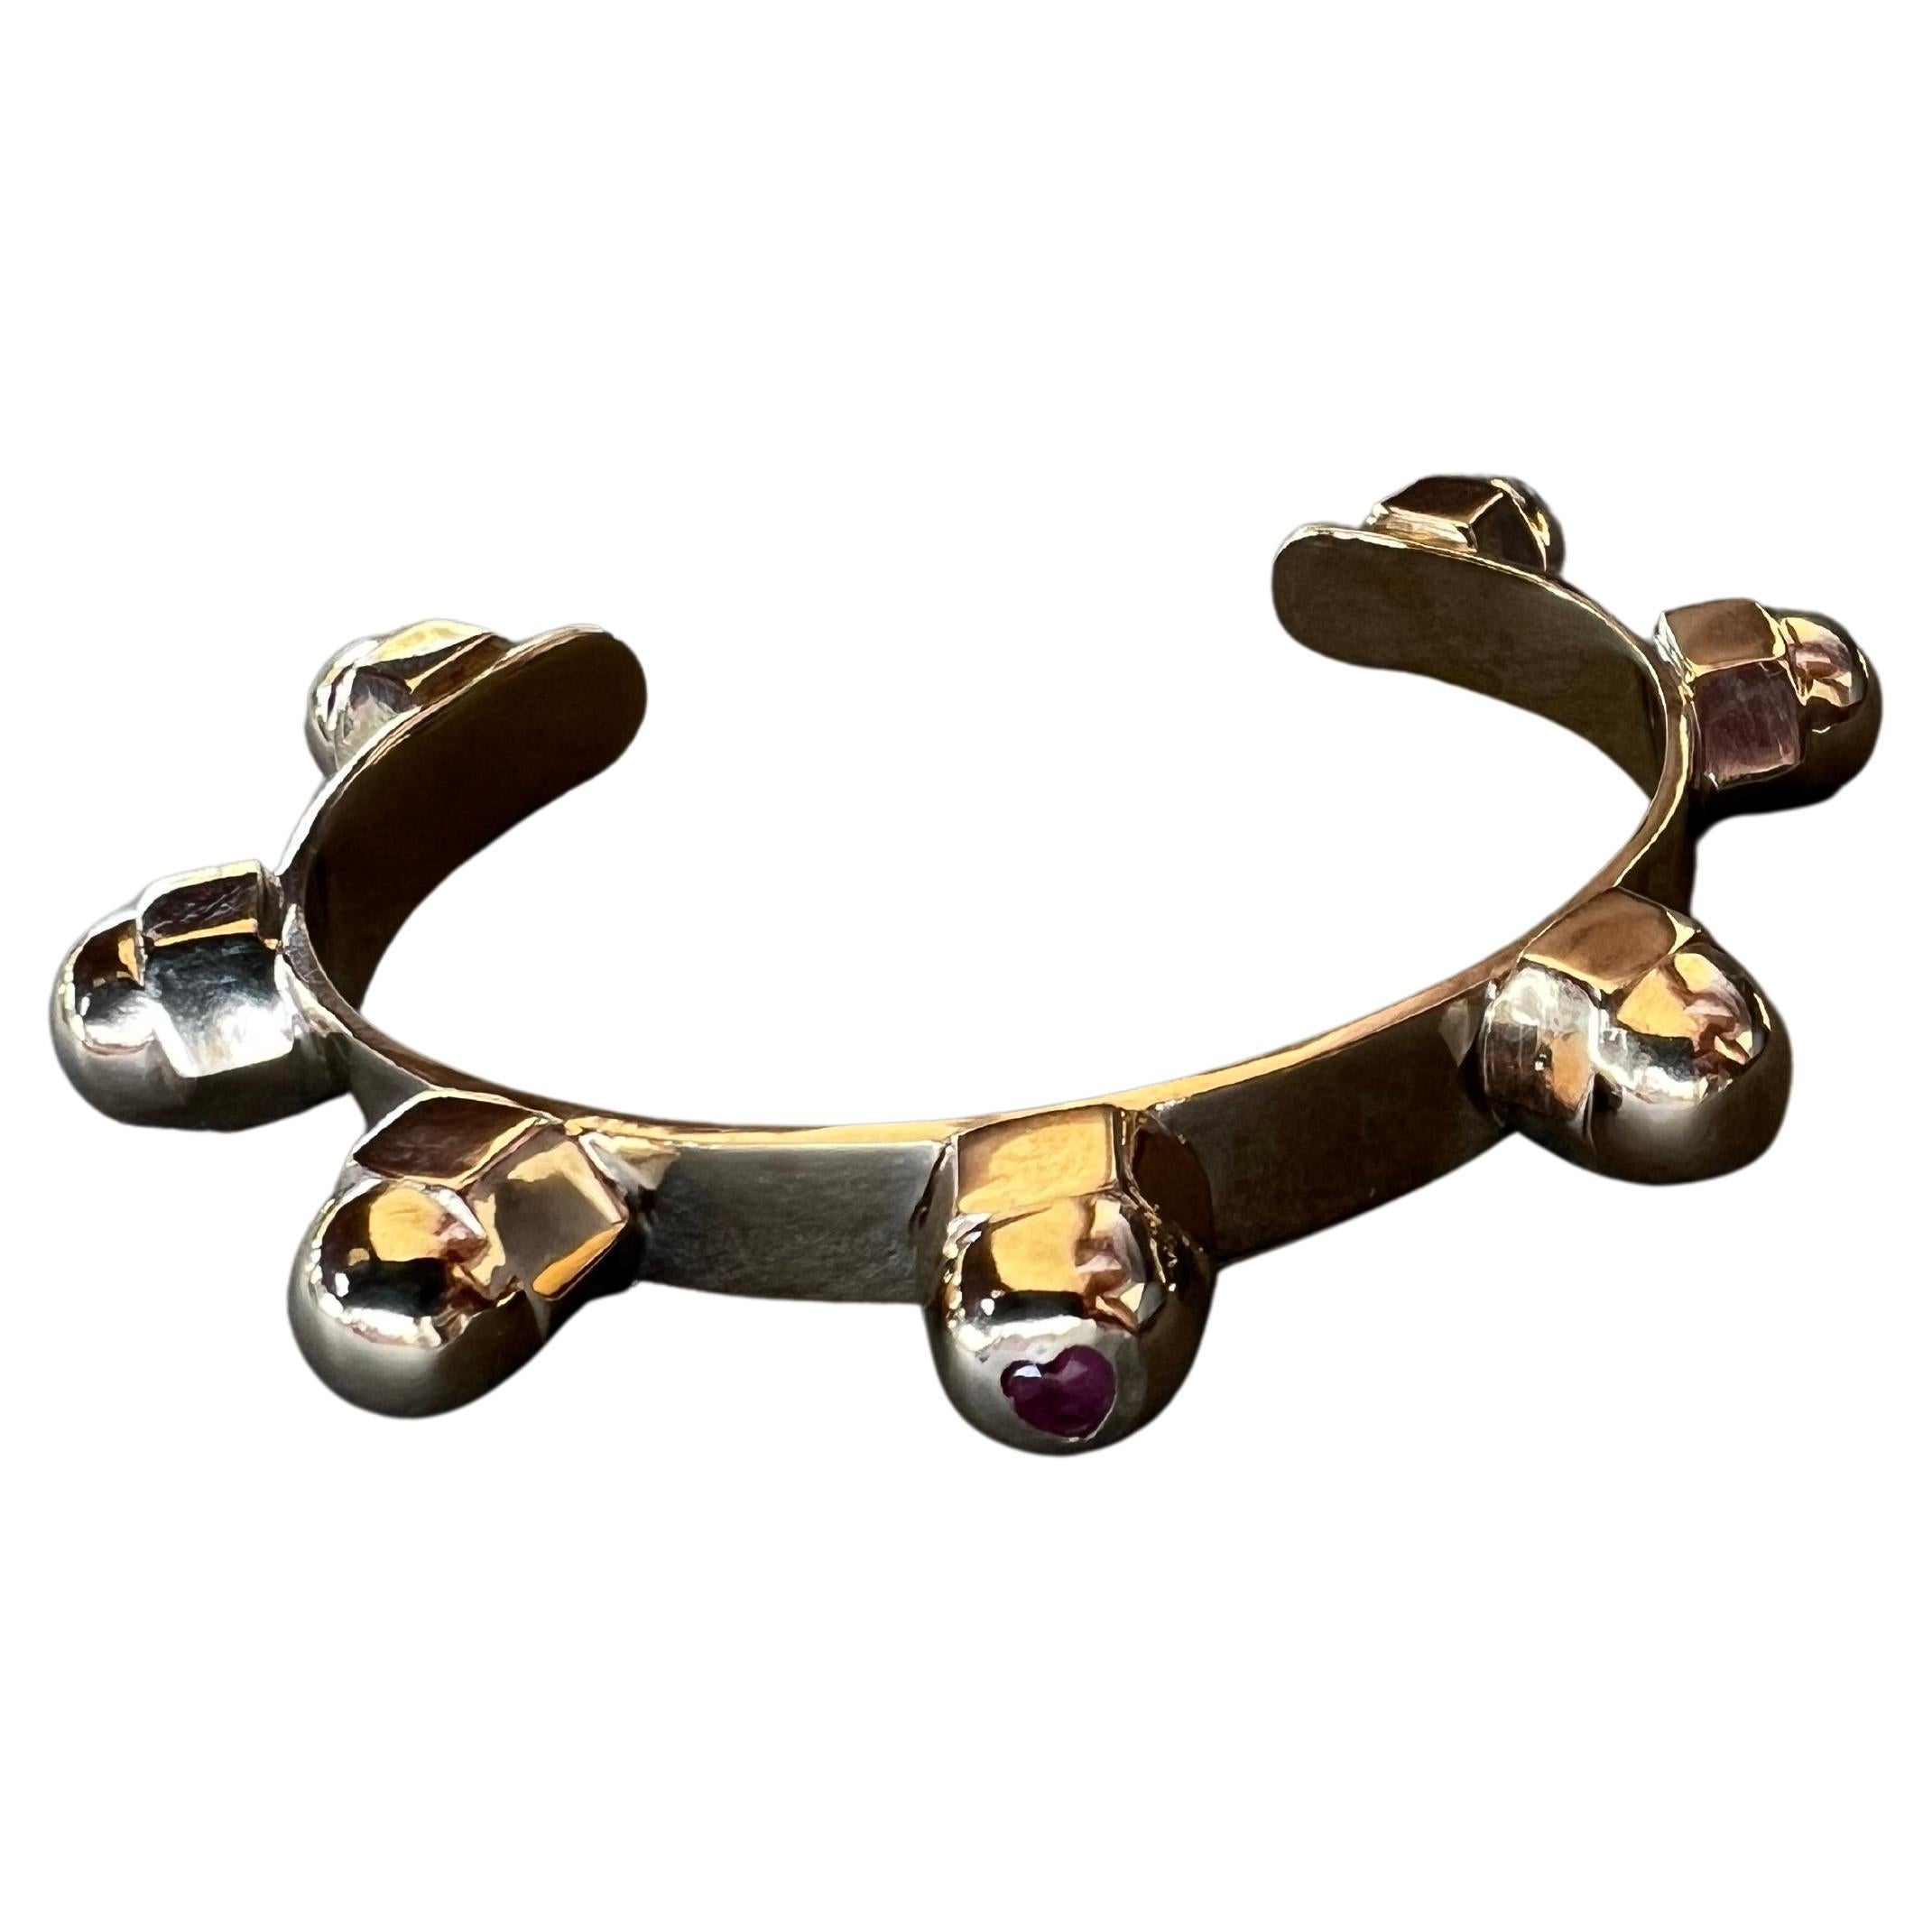 Ruby Heart Cuff Bangle Bracelet Bronze Studs Statement Piece J Dauphin In New Condition For Sale In Los Angeles, CA